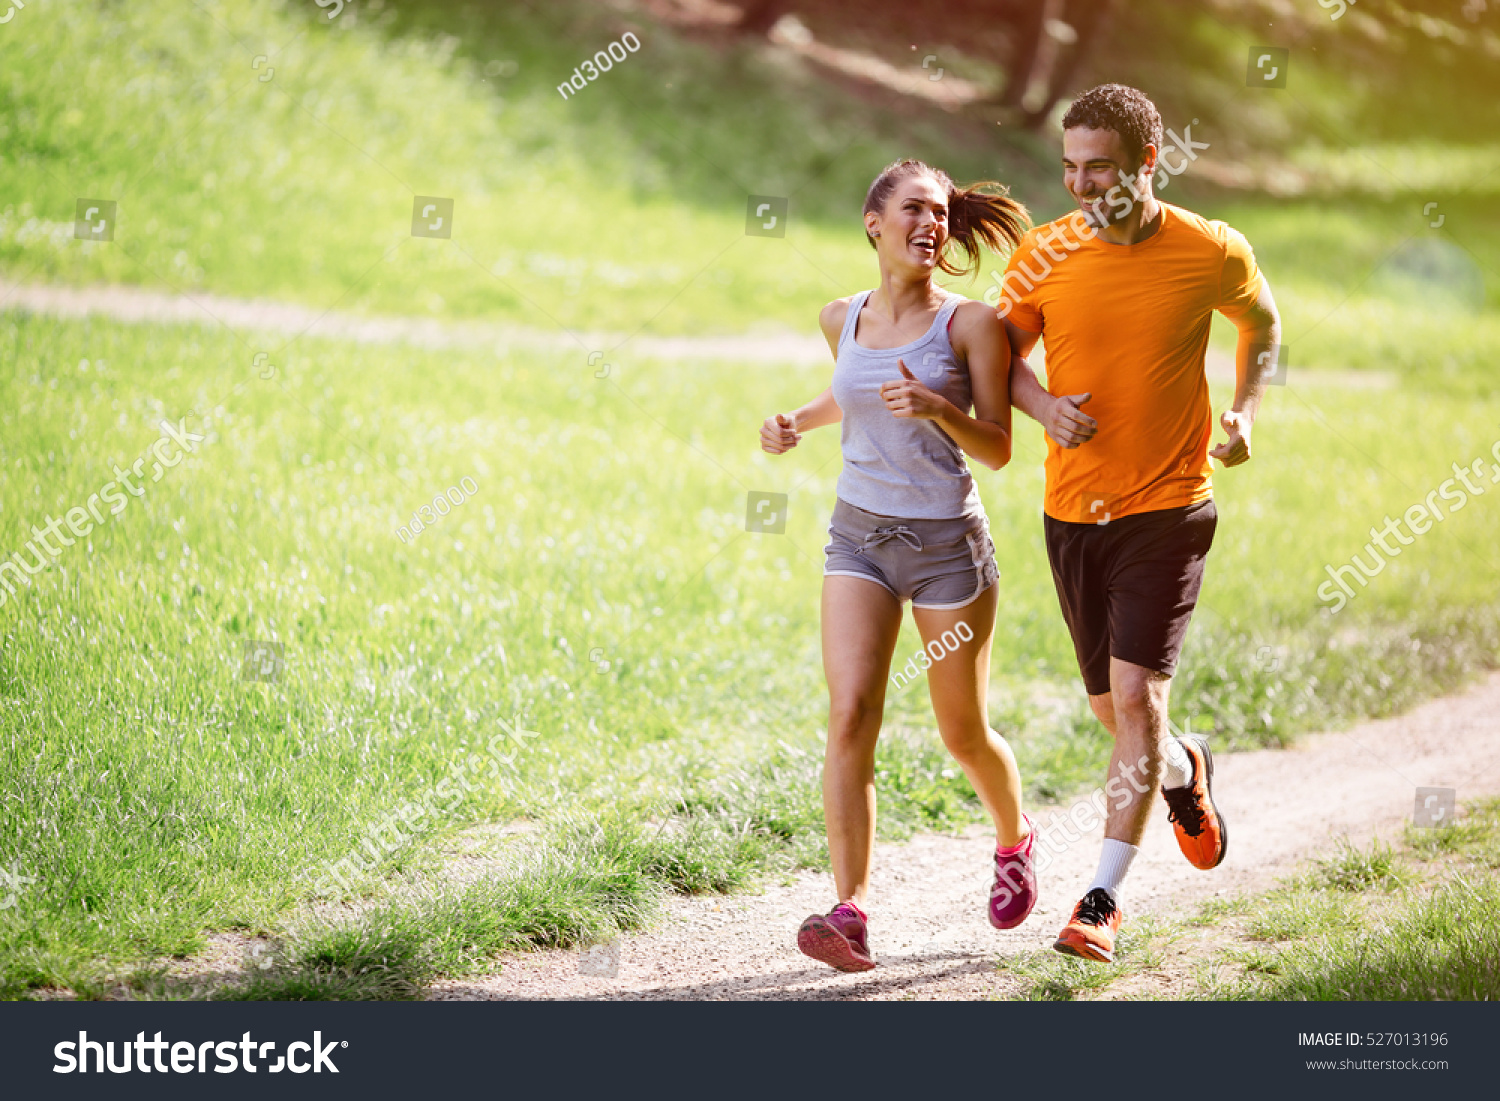 Spytte fast flaskehals Couple Jogging Running Outdoors Nature Stock Photo (Edit Now) 527013196